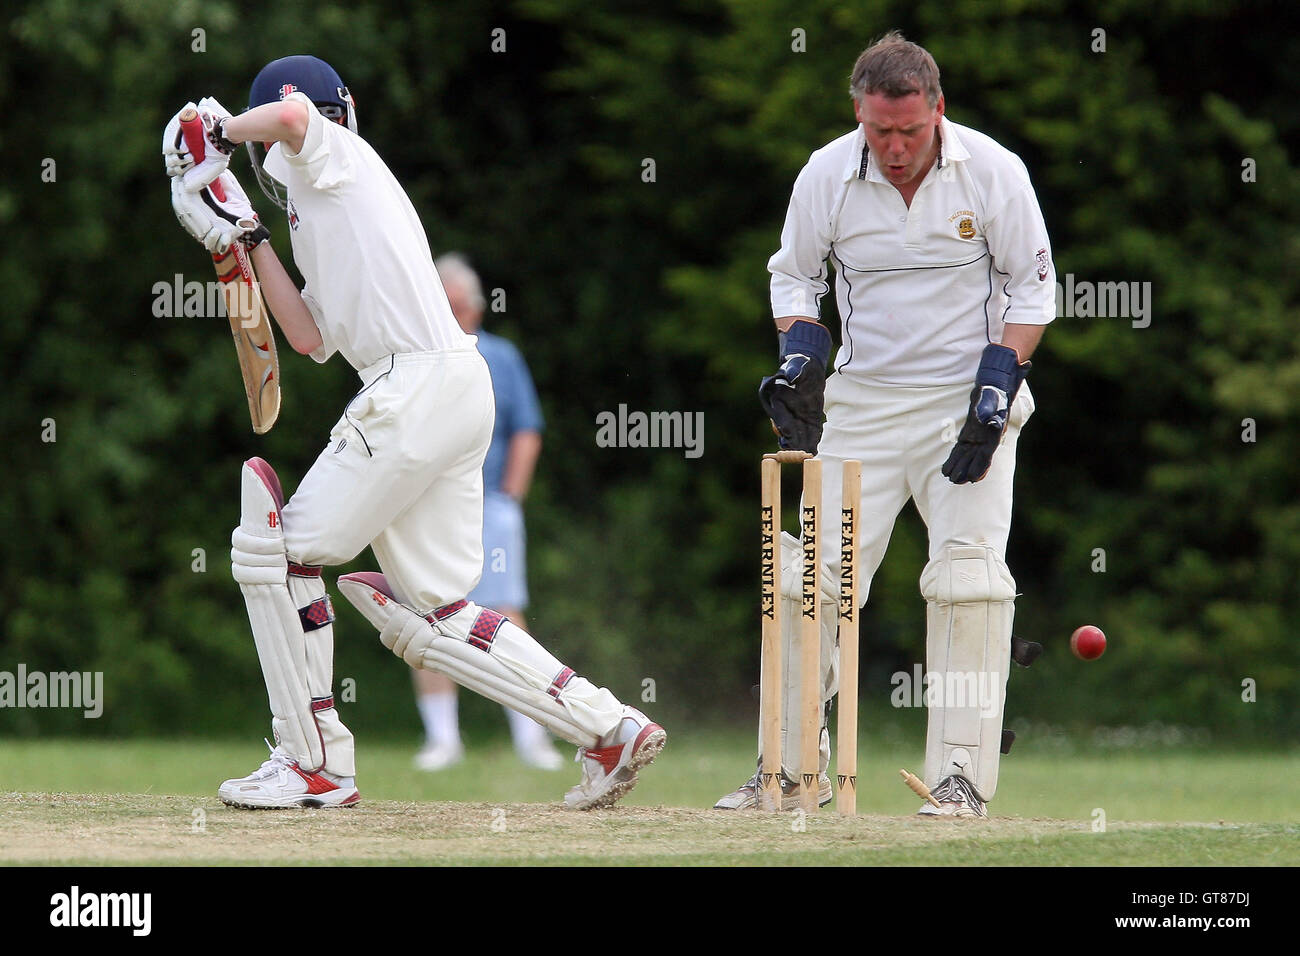 A Chinnery of Havering is bowled by Edwards of Galleywood - Havering-Atte-Bower CC 3rd XI vs Galleywood CC 2nd XI - Mid-Essex Cricket League - 05/06/10 Stock Photo